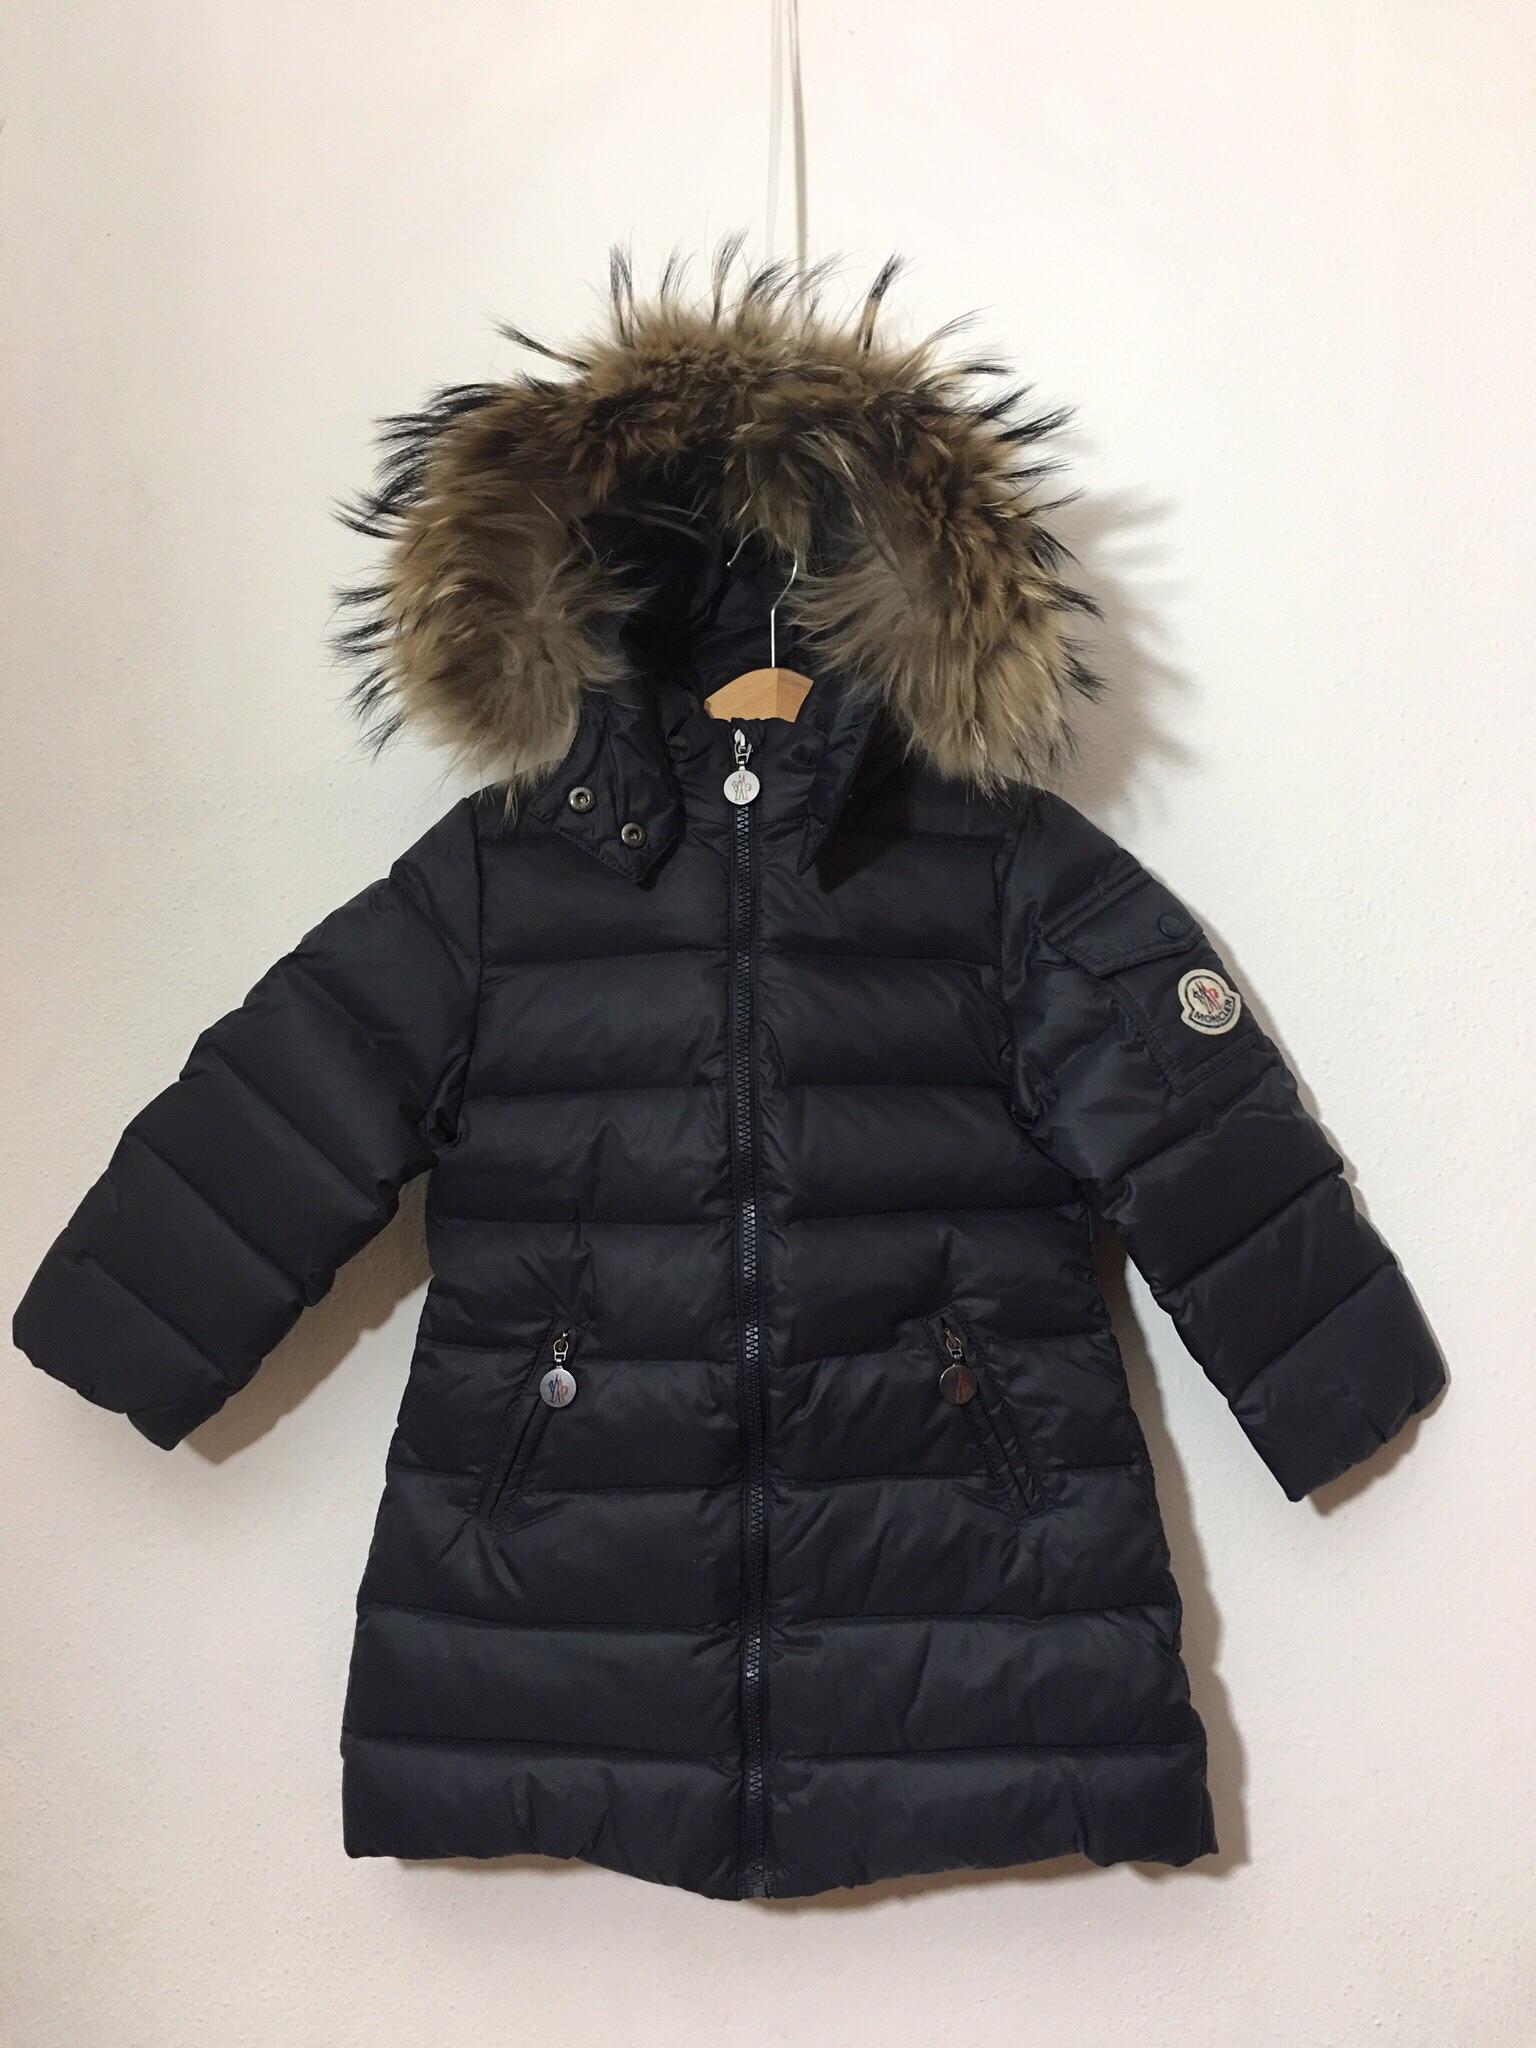 CAPPOTTO MONCLER BAMBINA 3 anni in 20124 Milano for €120.00 for sale |  Shpock